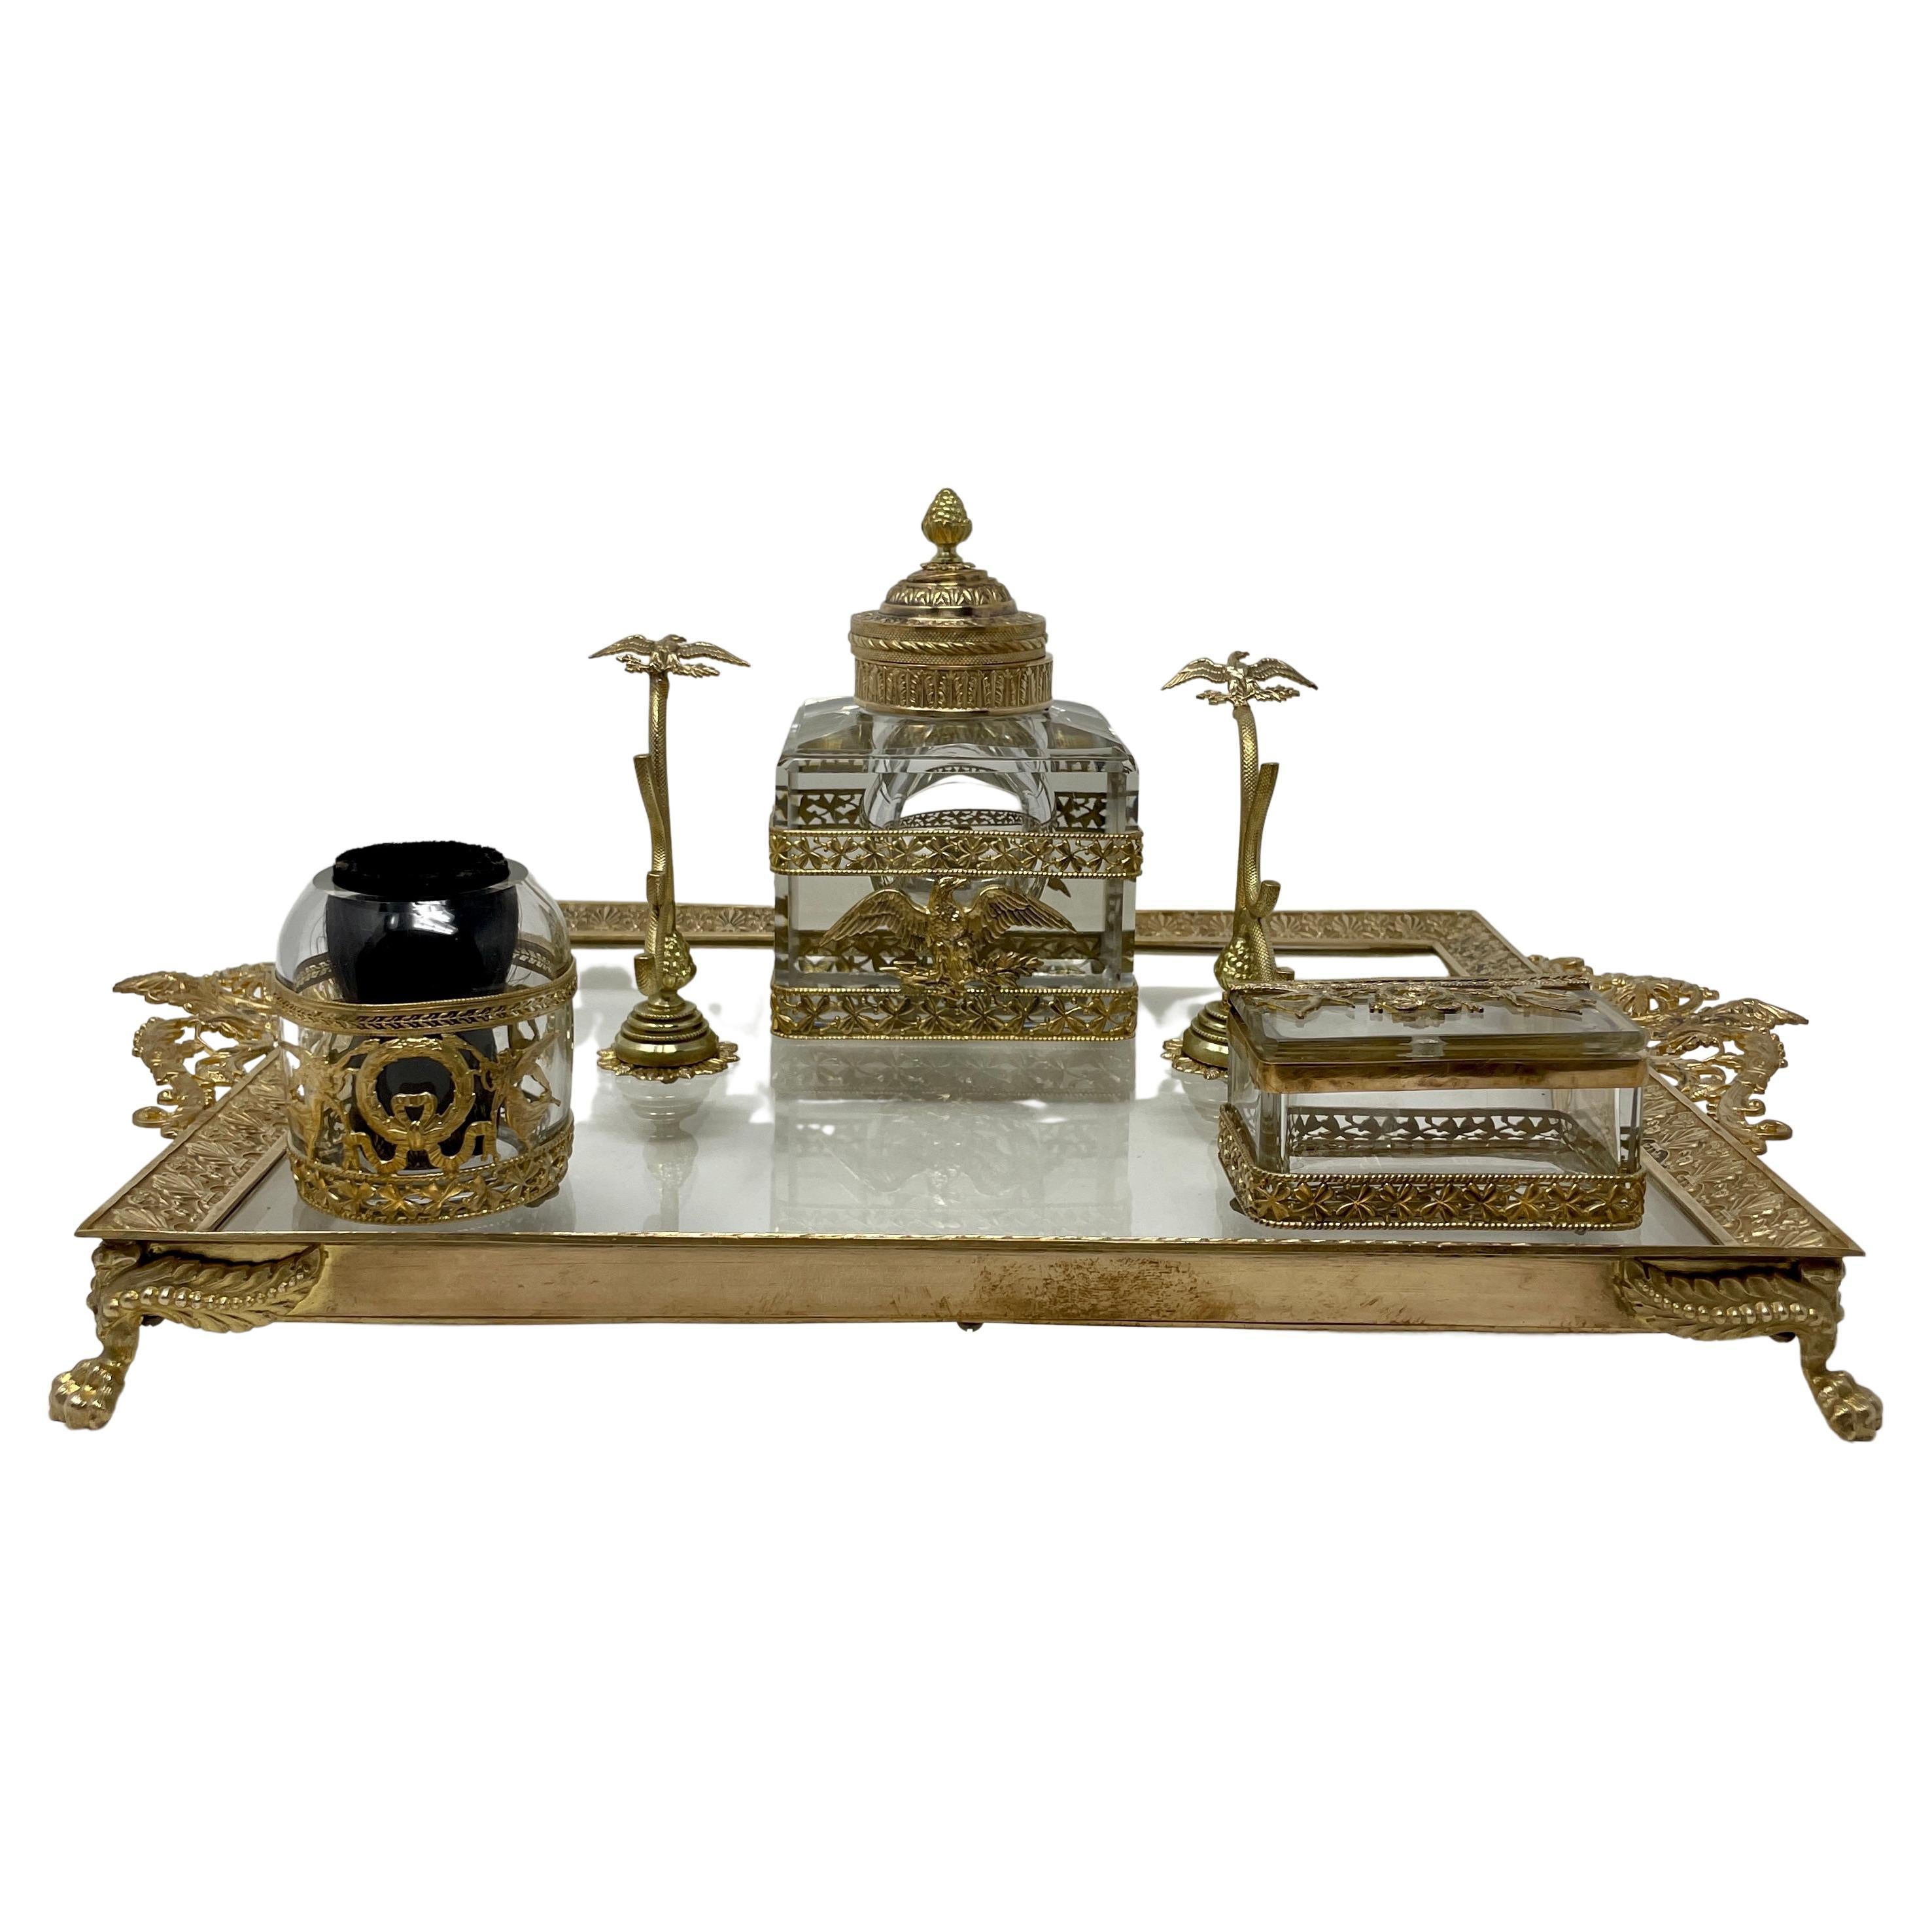 Antique French Bronze D'ore & Cut Crystal Inkwell Desk Set on Stand, Circa 1900